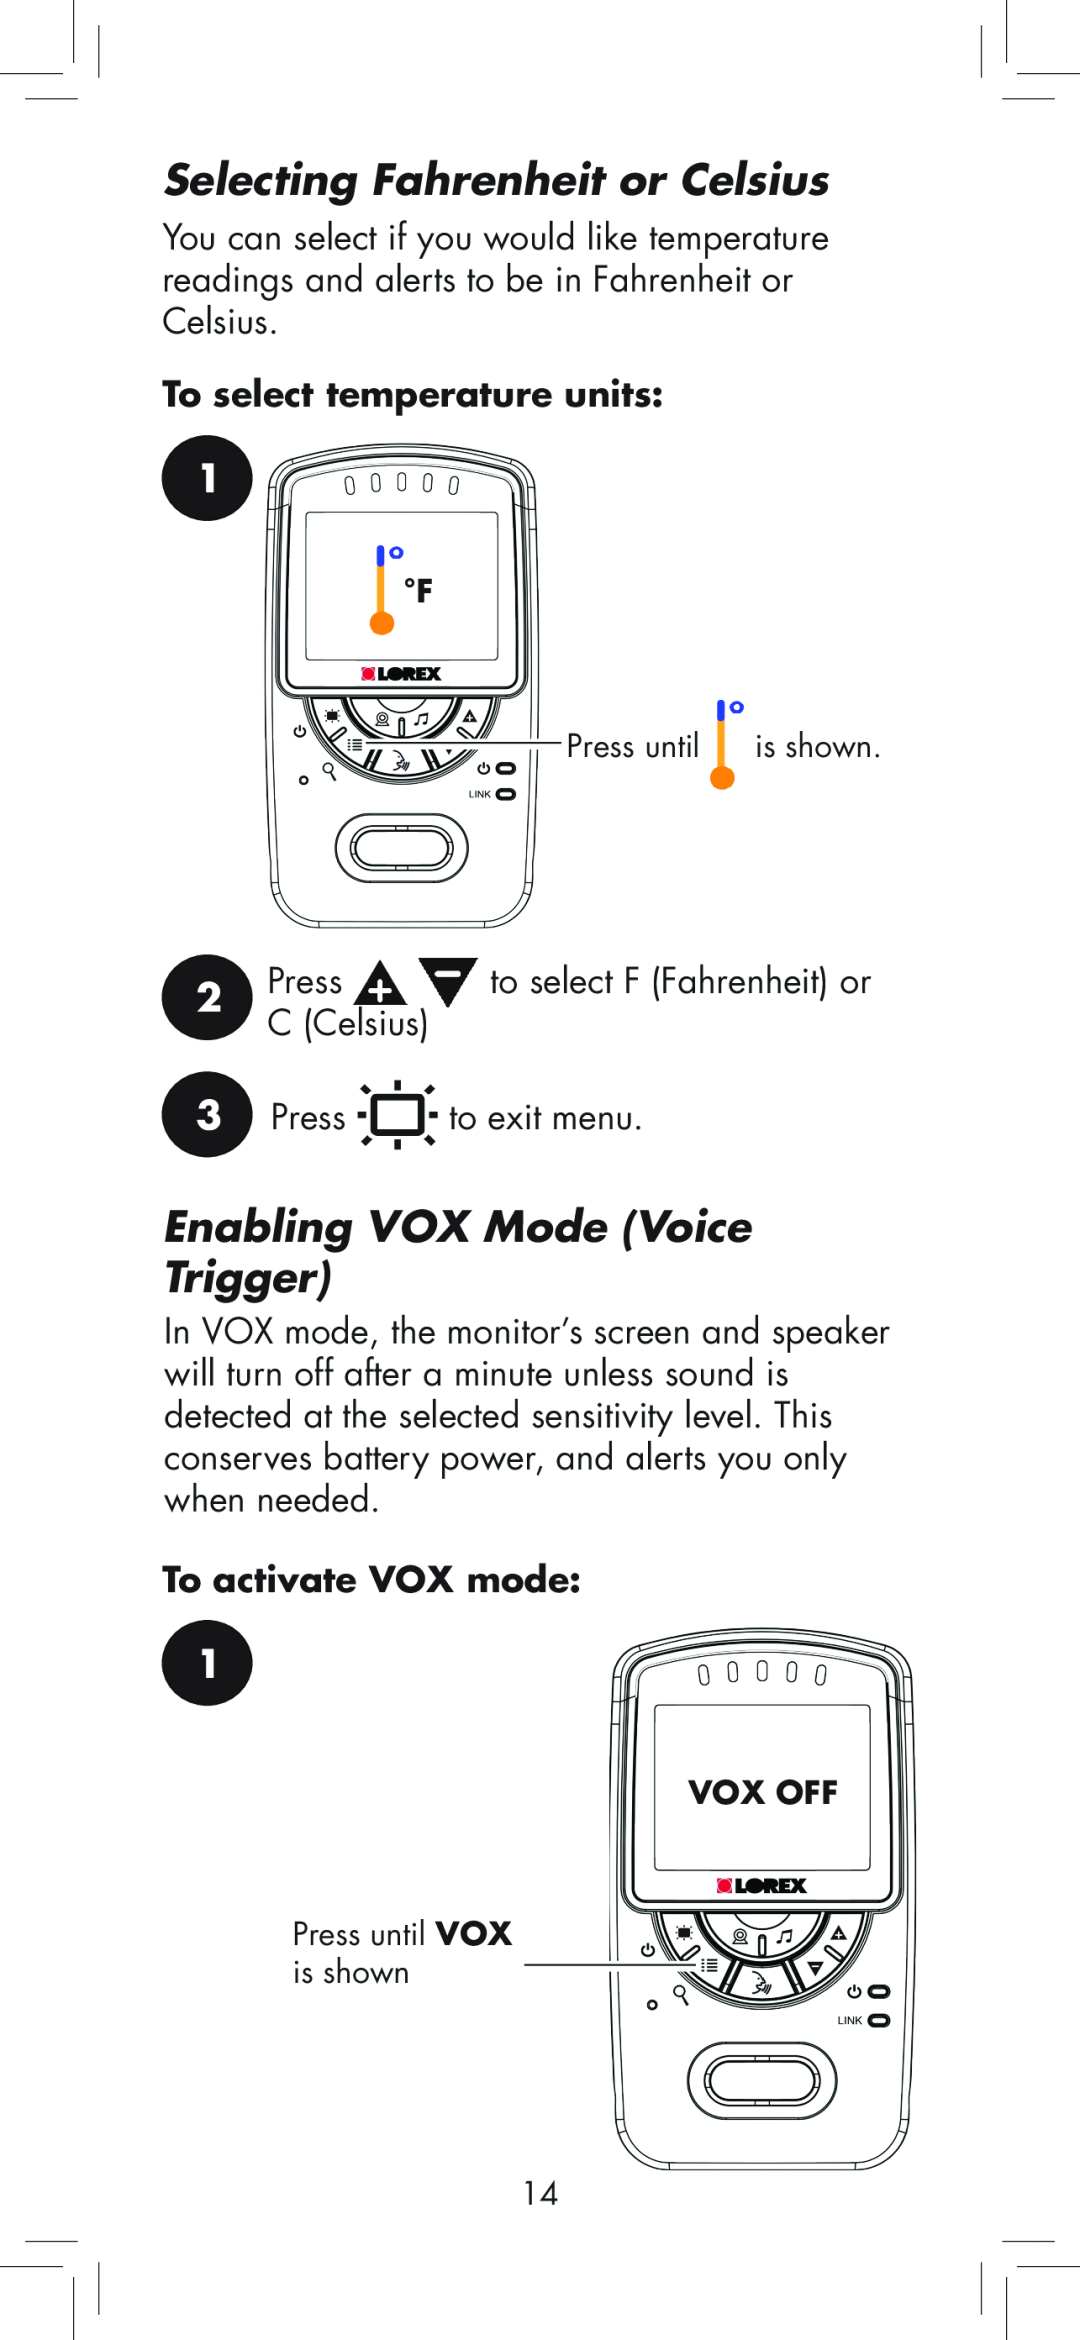 LOREX Technology BB2411 Selecting Fahrenheit or Celsius, Enabling VOX Mode Voice Trigger, To select temperature units 